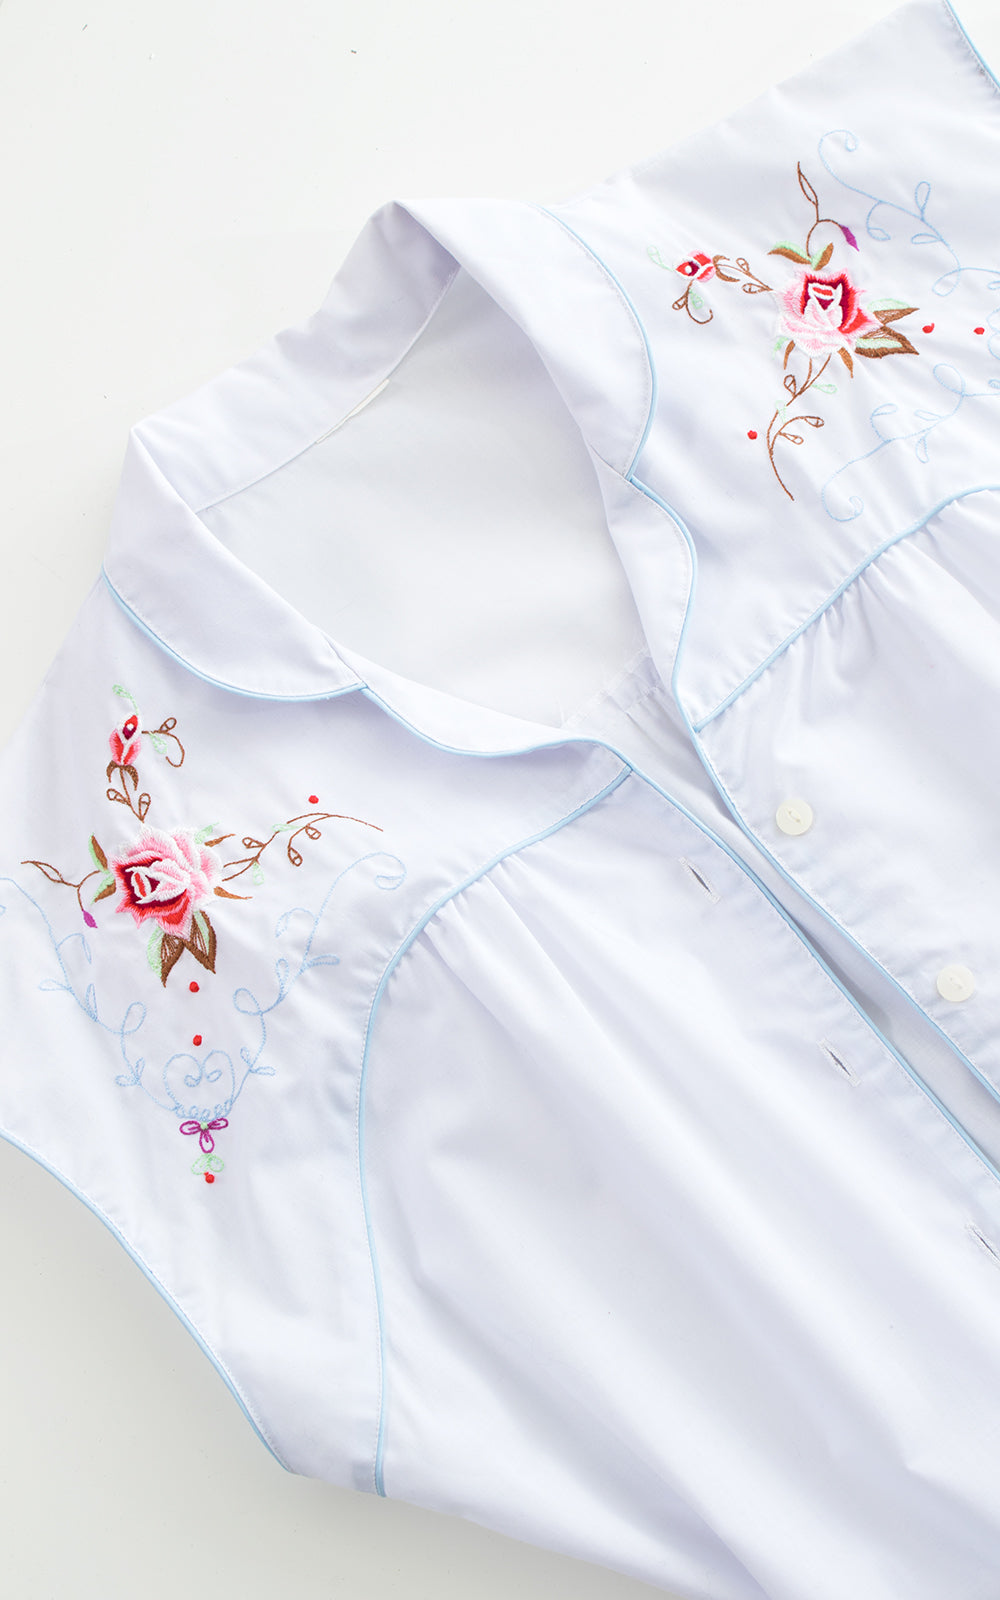 1970s 1980s Rose Embroidered Shirt Dress with Pockets | medium